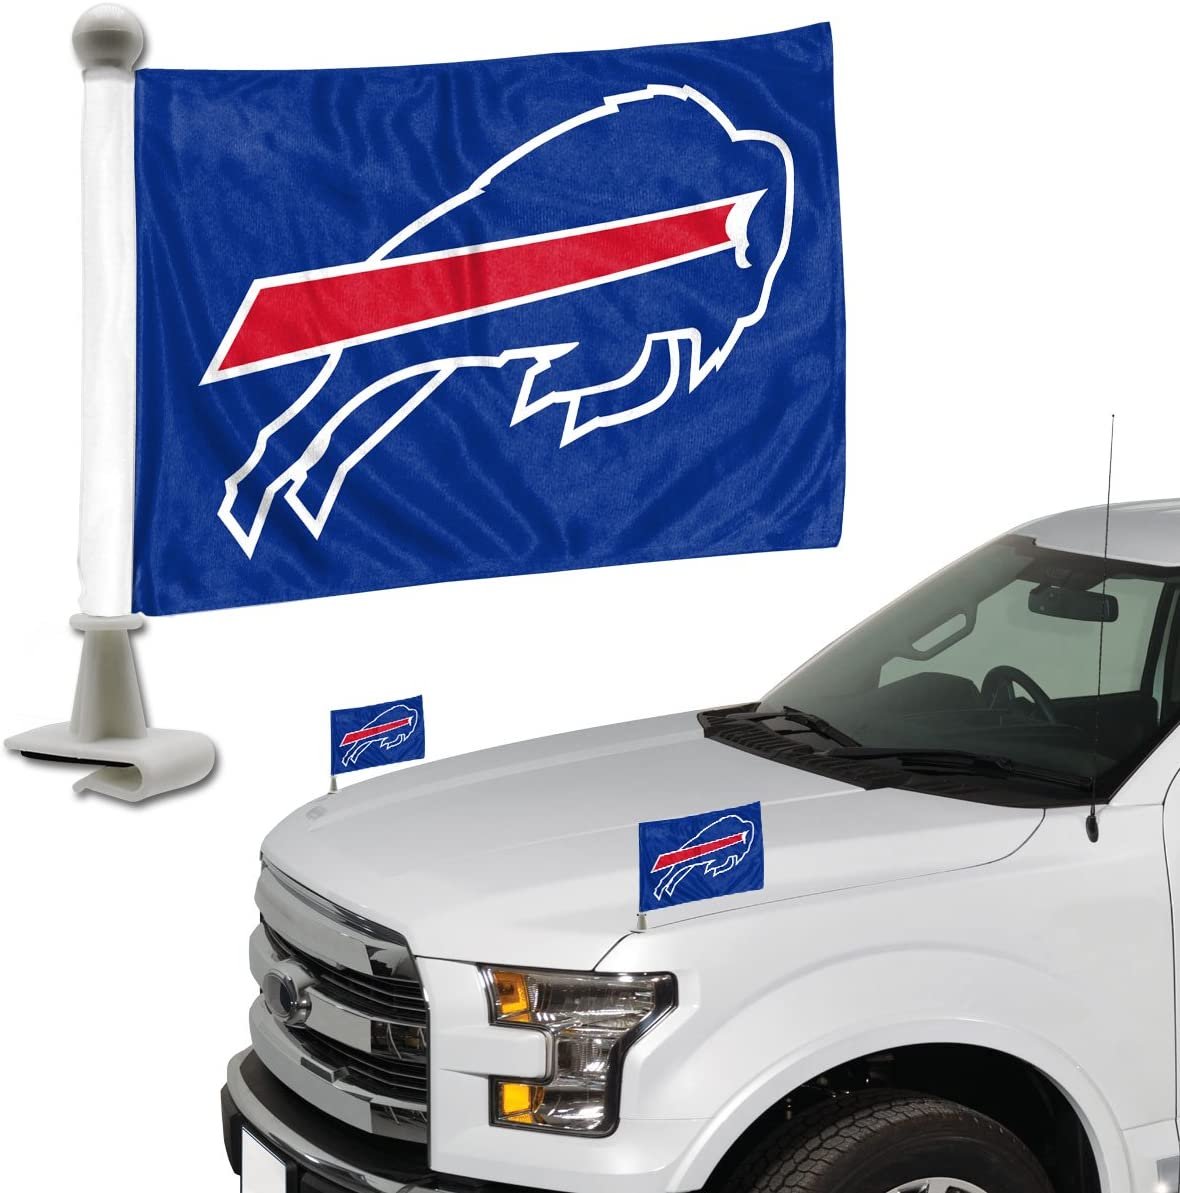 FANMATS 61859 Buffalo Bills Ambassador Car Flags - 2 Pack Mini Auto Flags, 4in X 6in, Perfect for Hood or Trunk